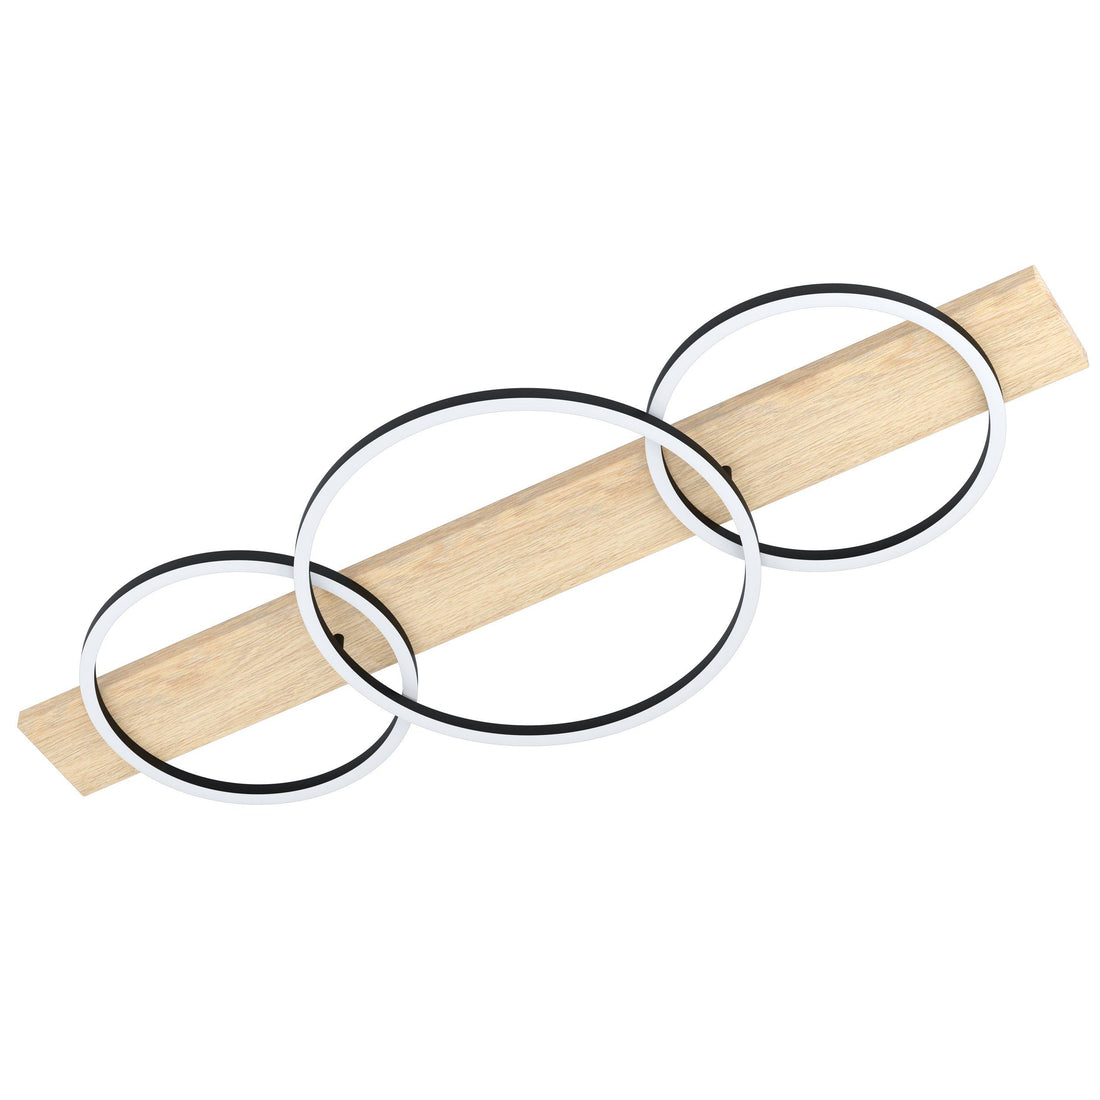 Boyal Natural Timber with Black 3 Ring LED Contemporary Close to Ceiling